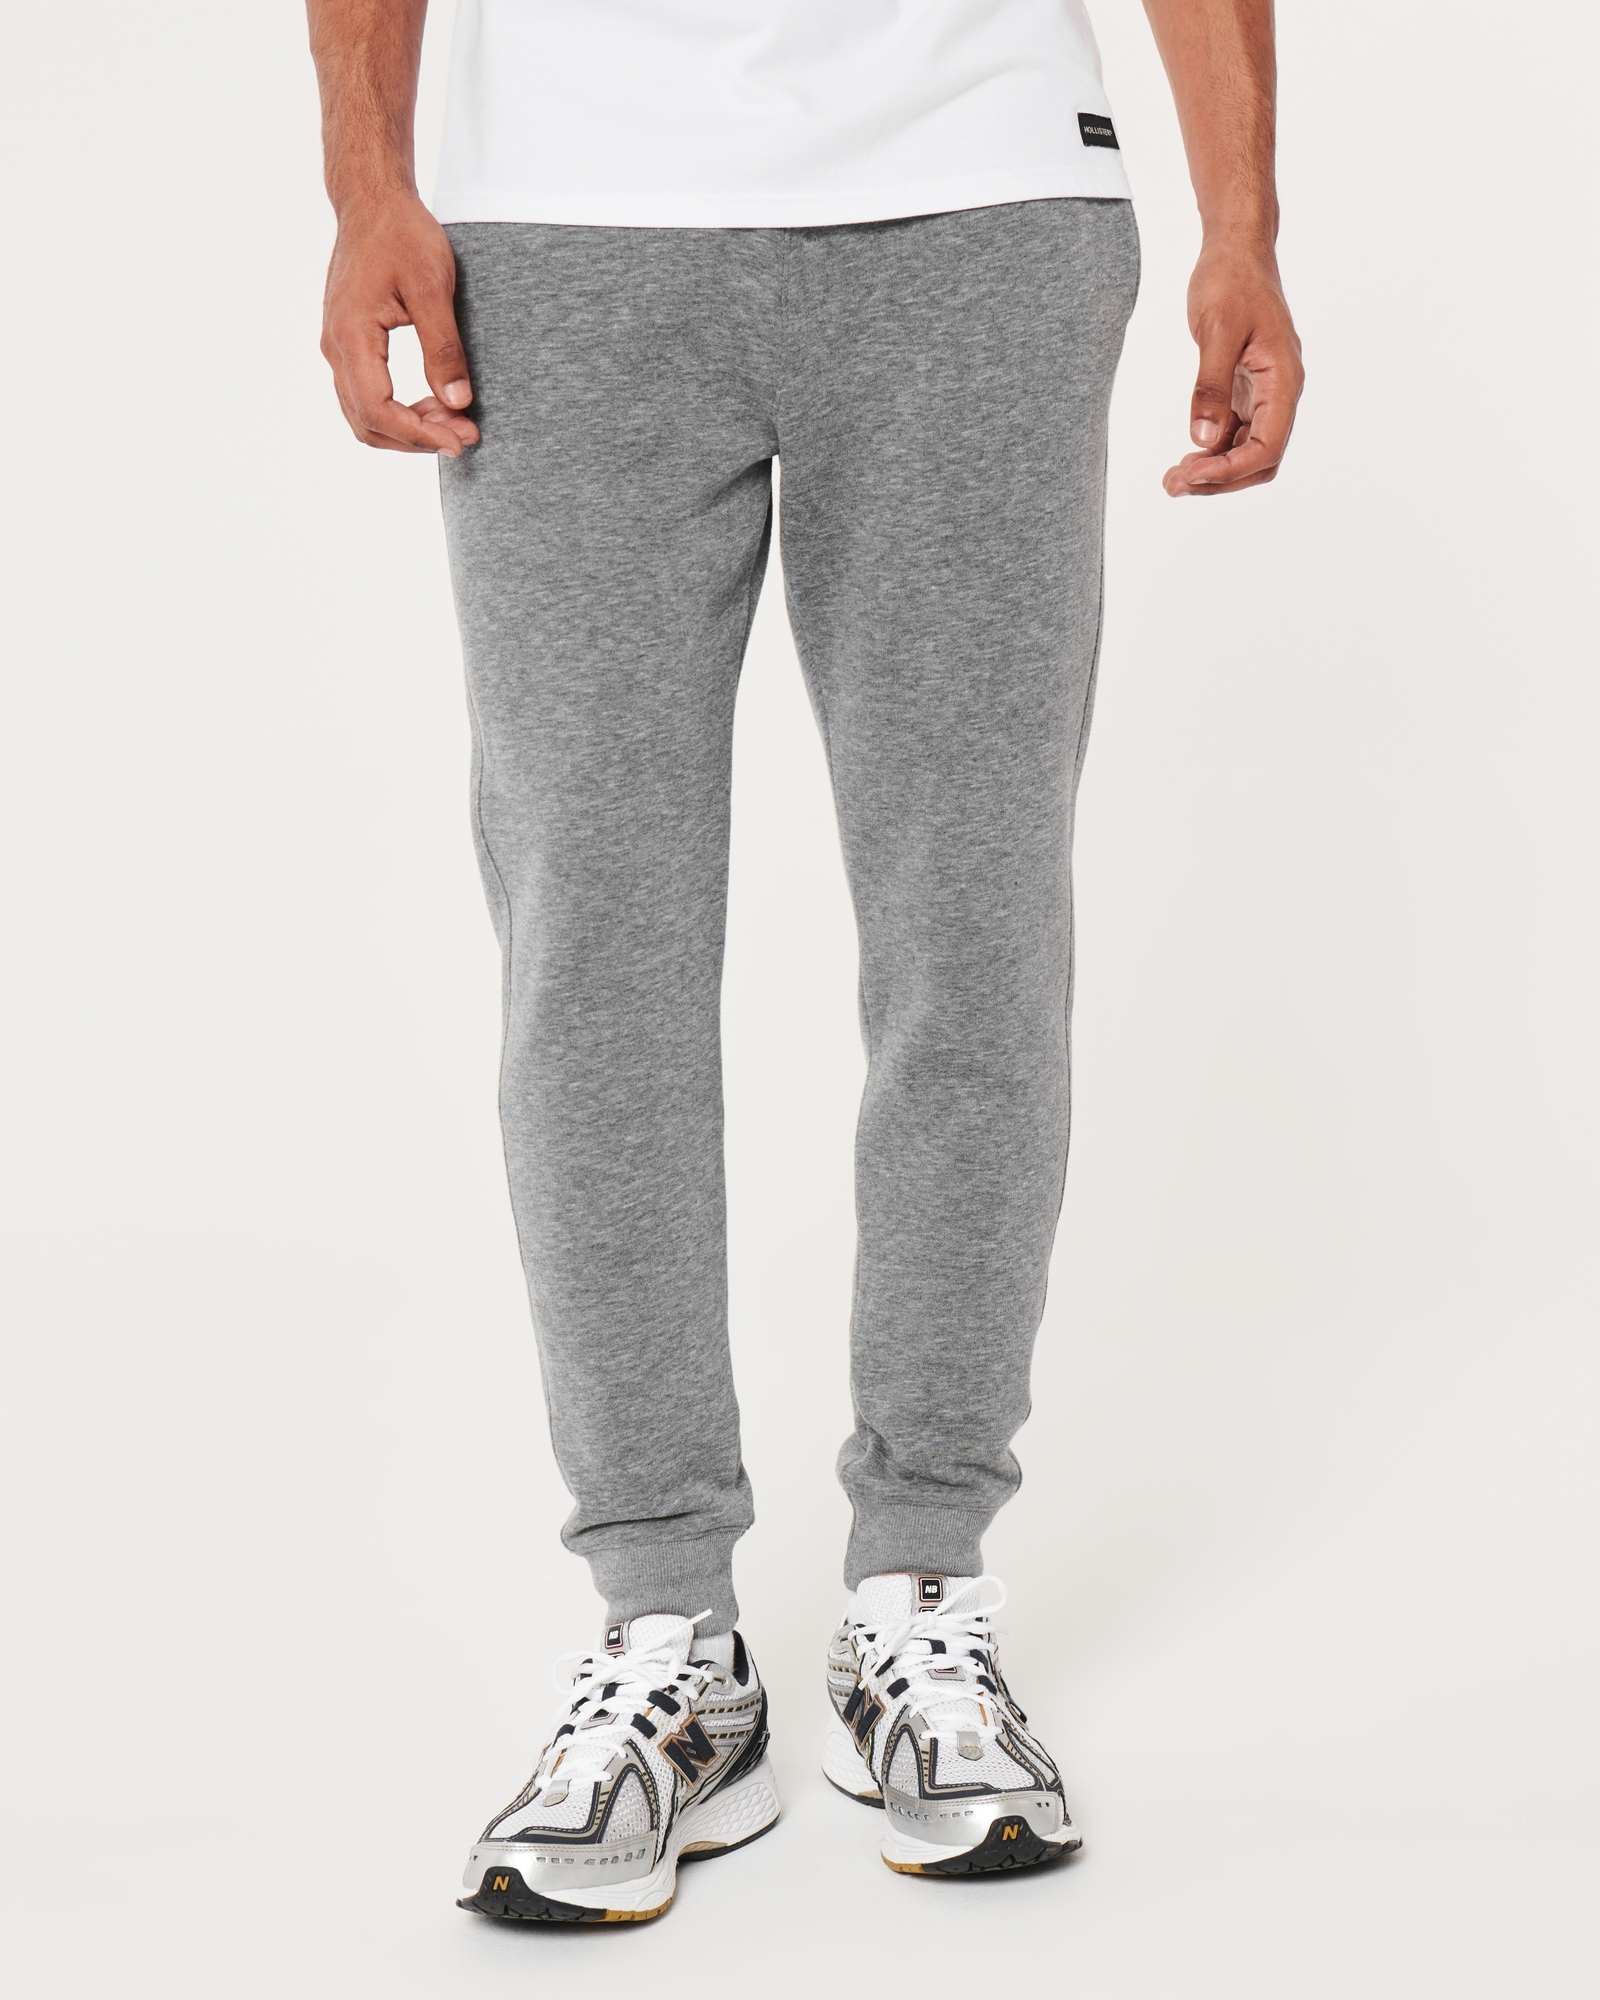 Hollister Co. Gray Track & Sweat Pants for Men